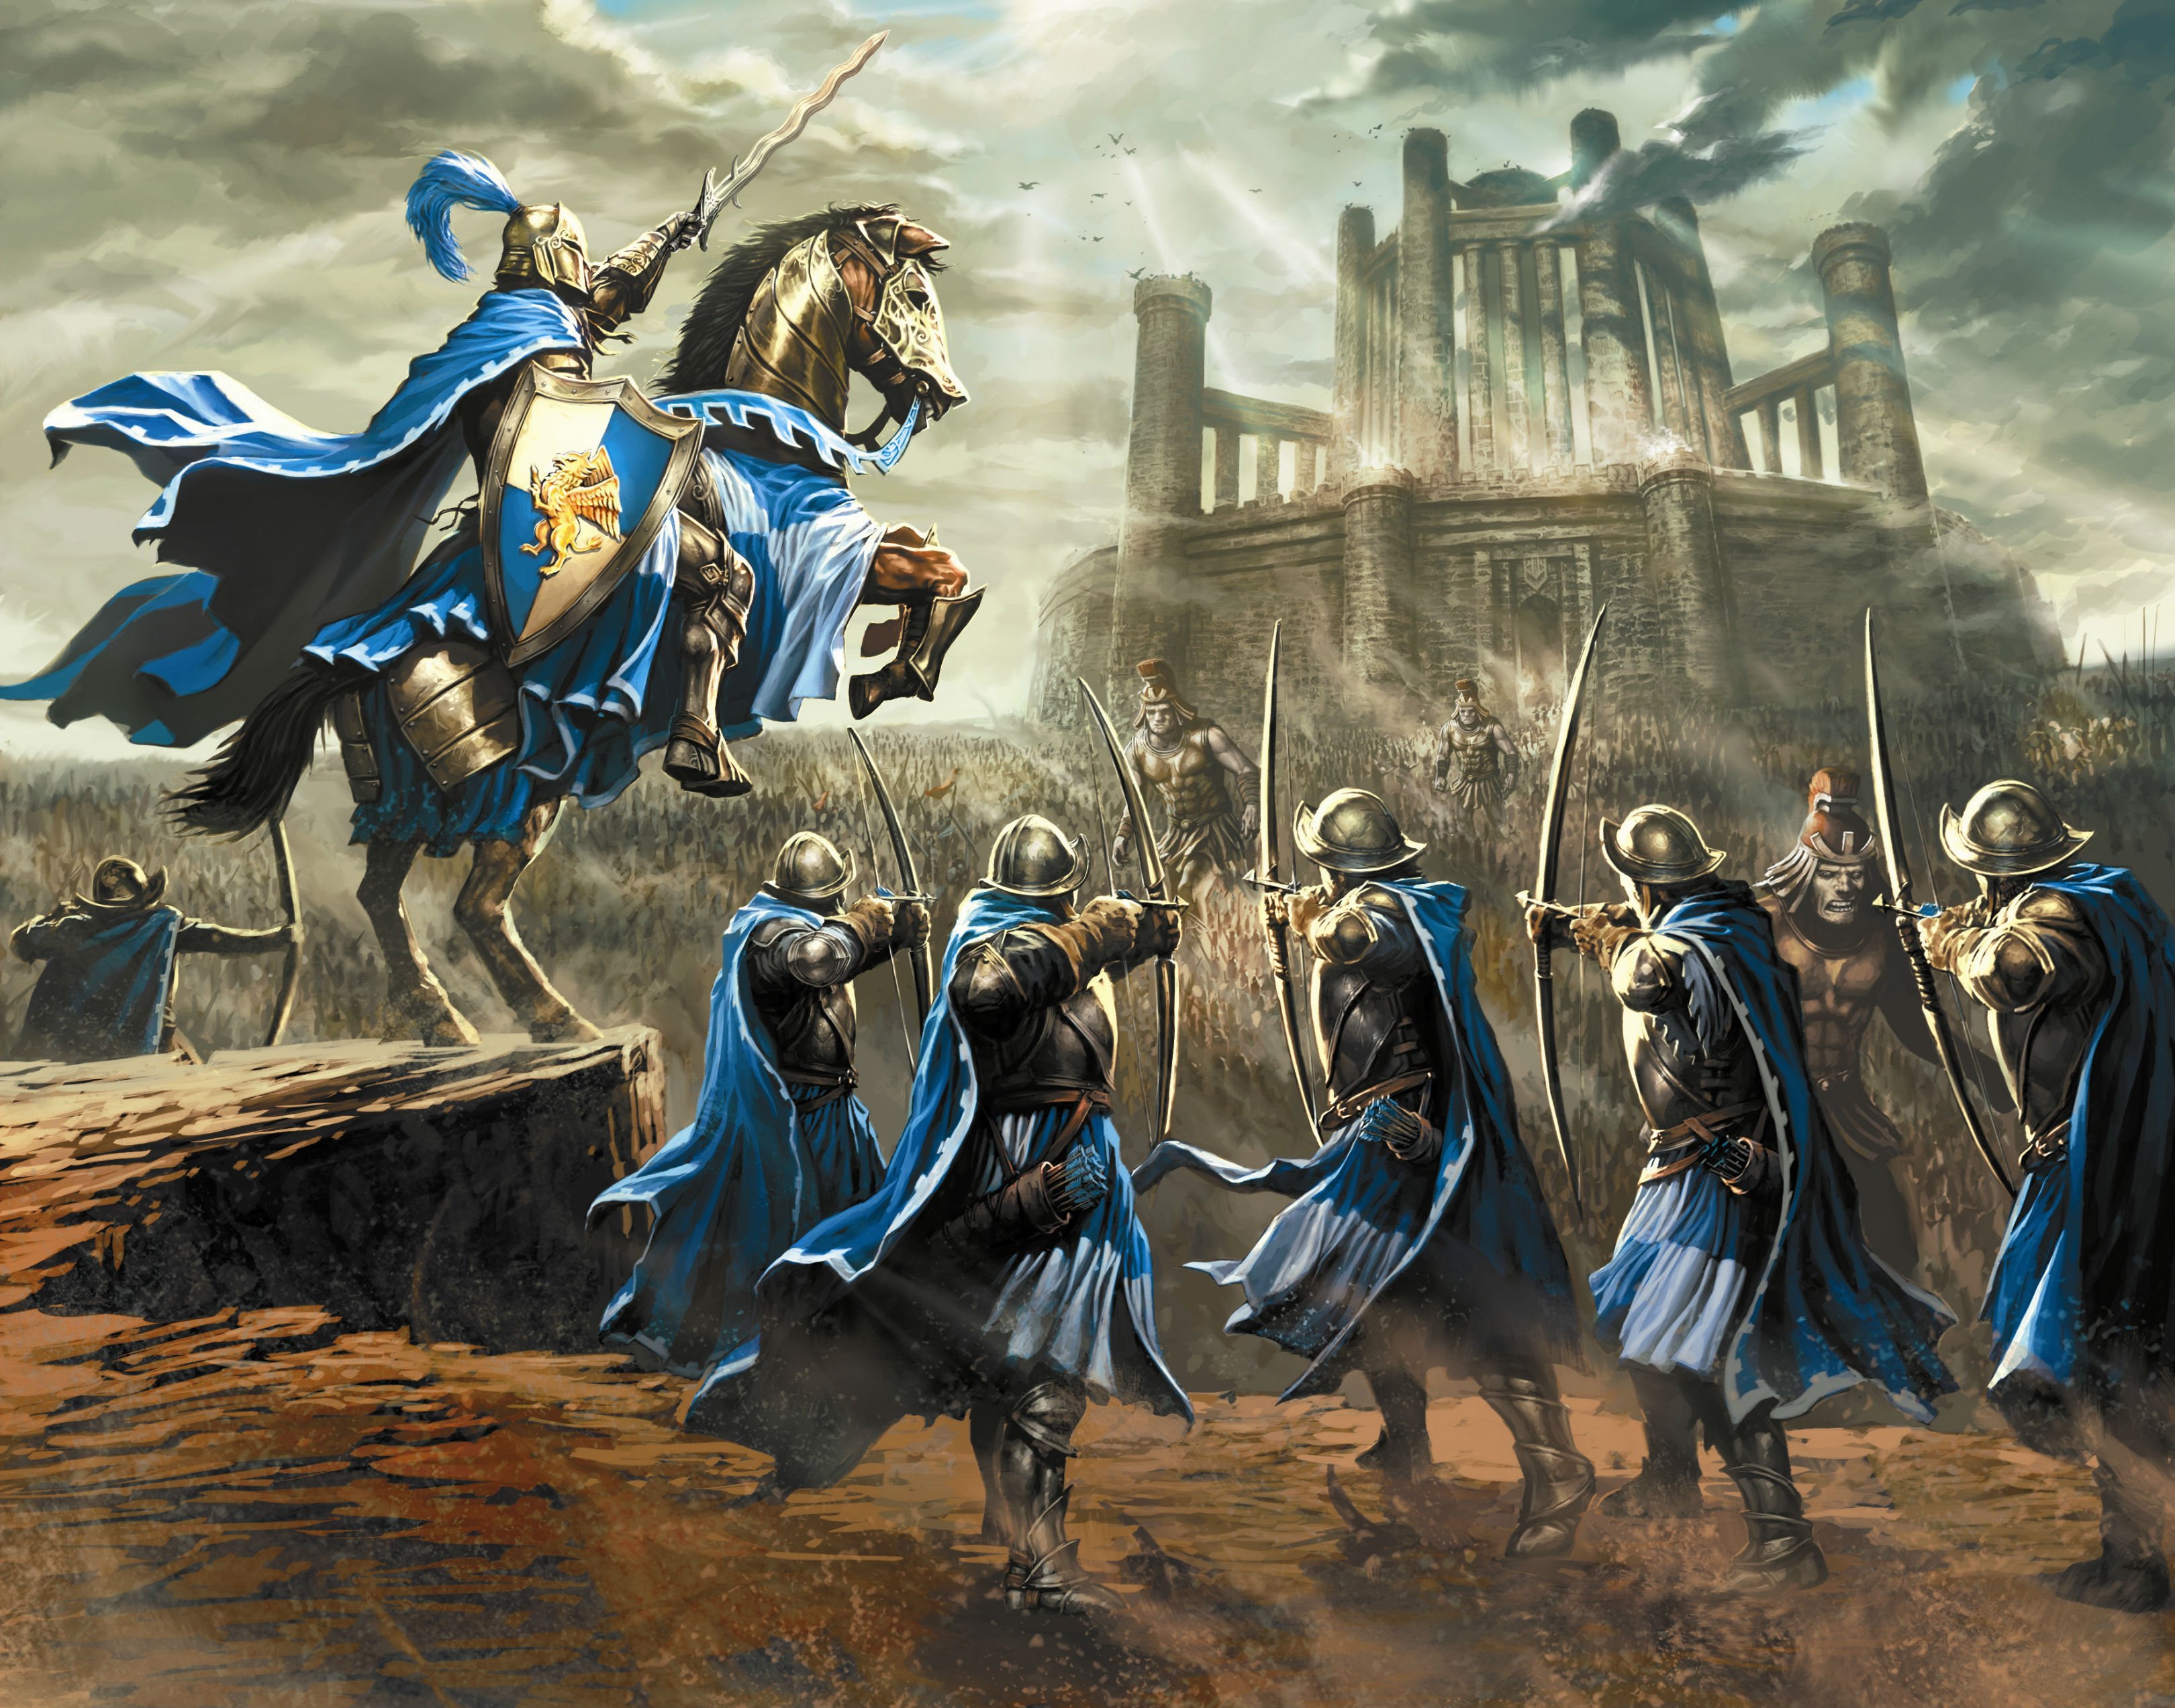 heroes, Might, Magic, Strategy, Fantasy, Fighting, Adventure, Action, Online, 1hmm, Battle, Warrior, Knight, Army, Armor Wallpaper